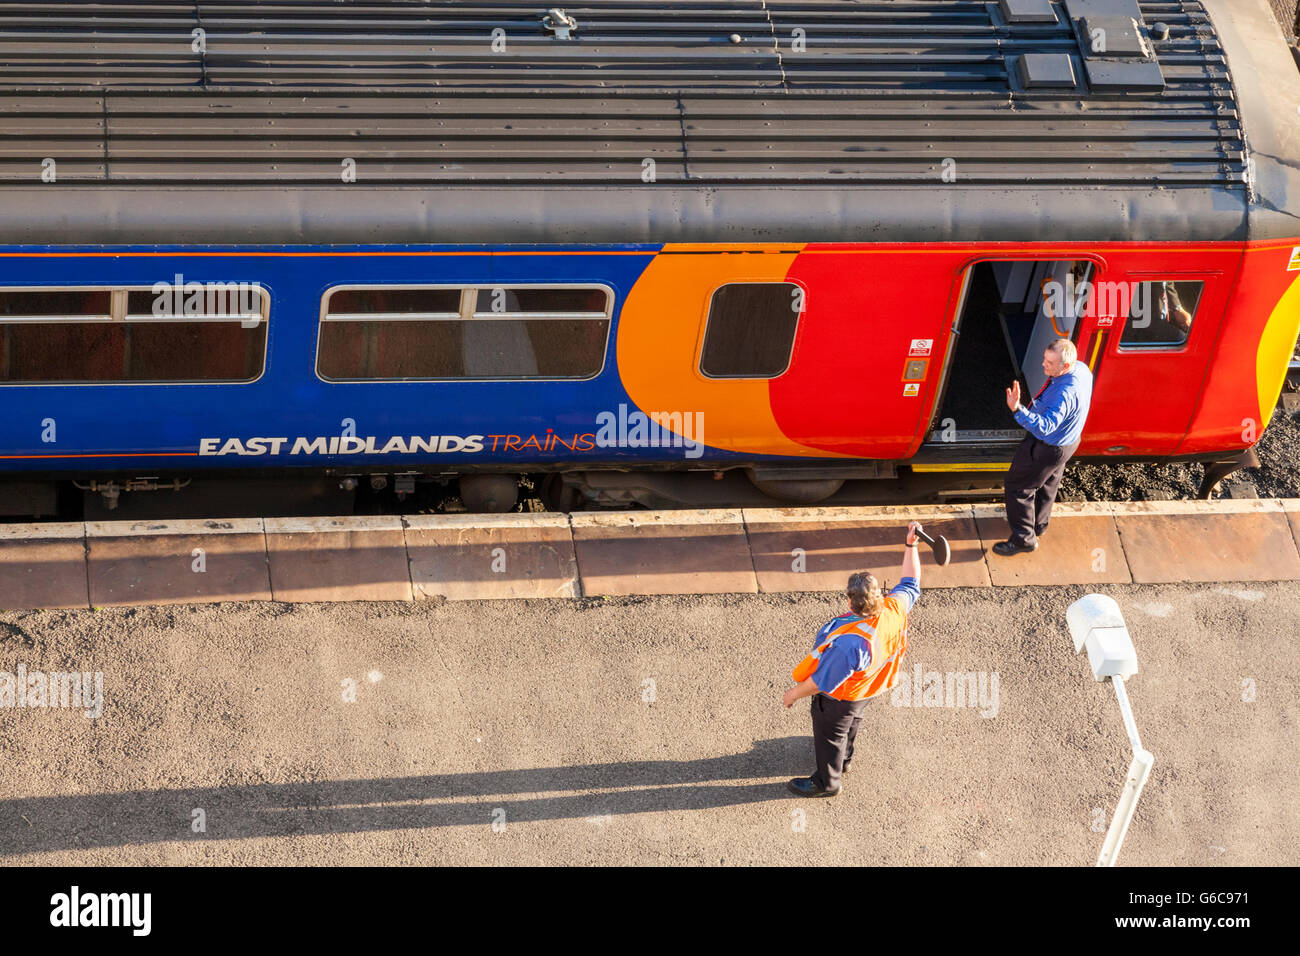 East Midlands Trains train ready to leave. Train departing from a platform at Nottingham Railway Station, Nottingham, England, UK Stock Photo